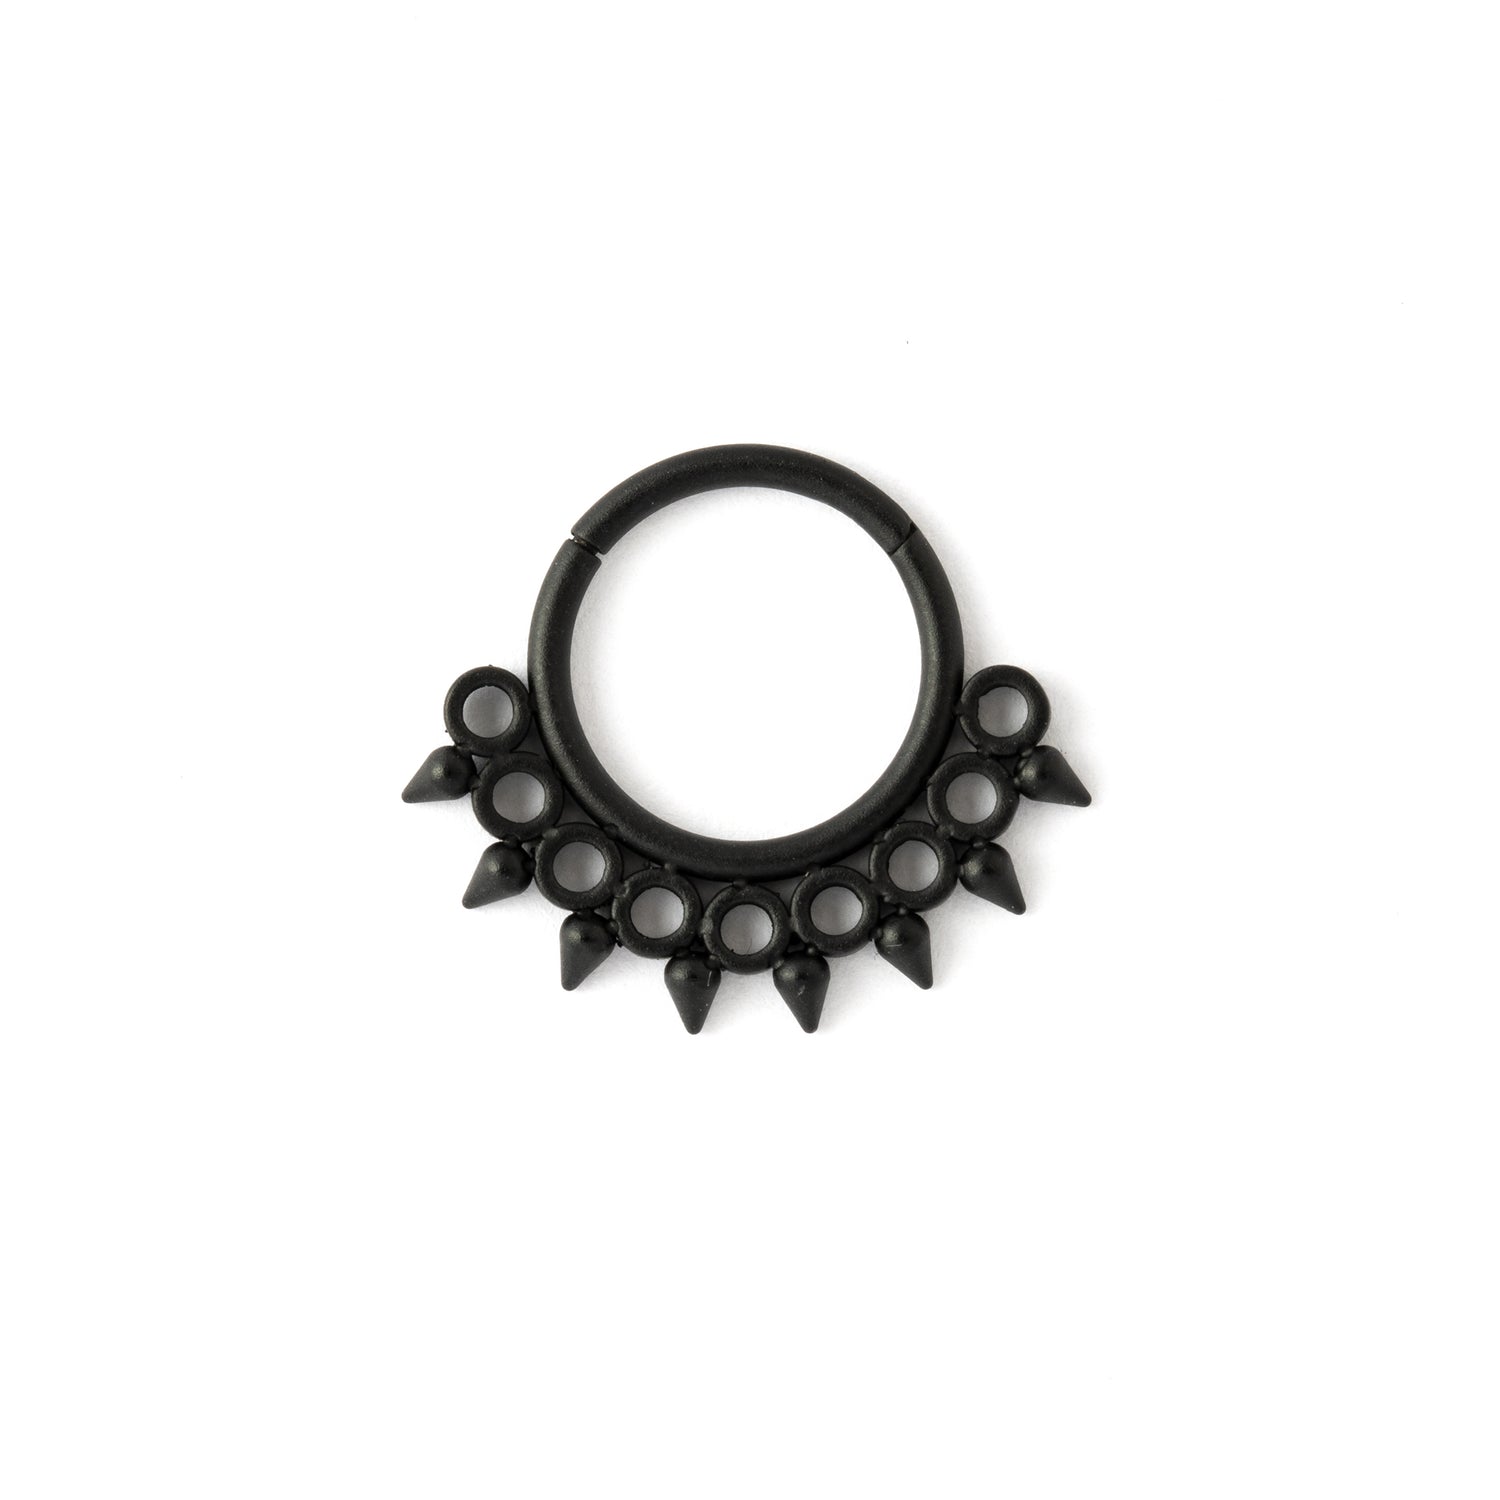 Triton Black surgical steel Septum Clicker ring frontal view